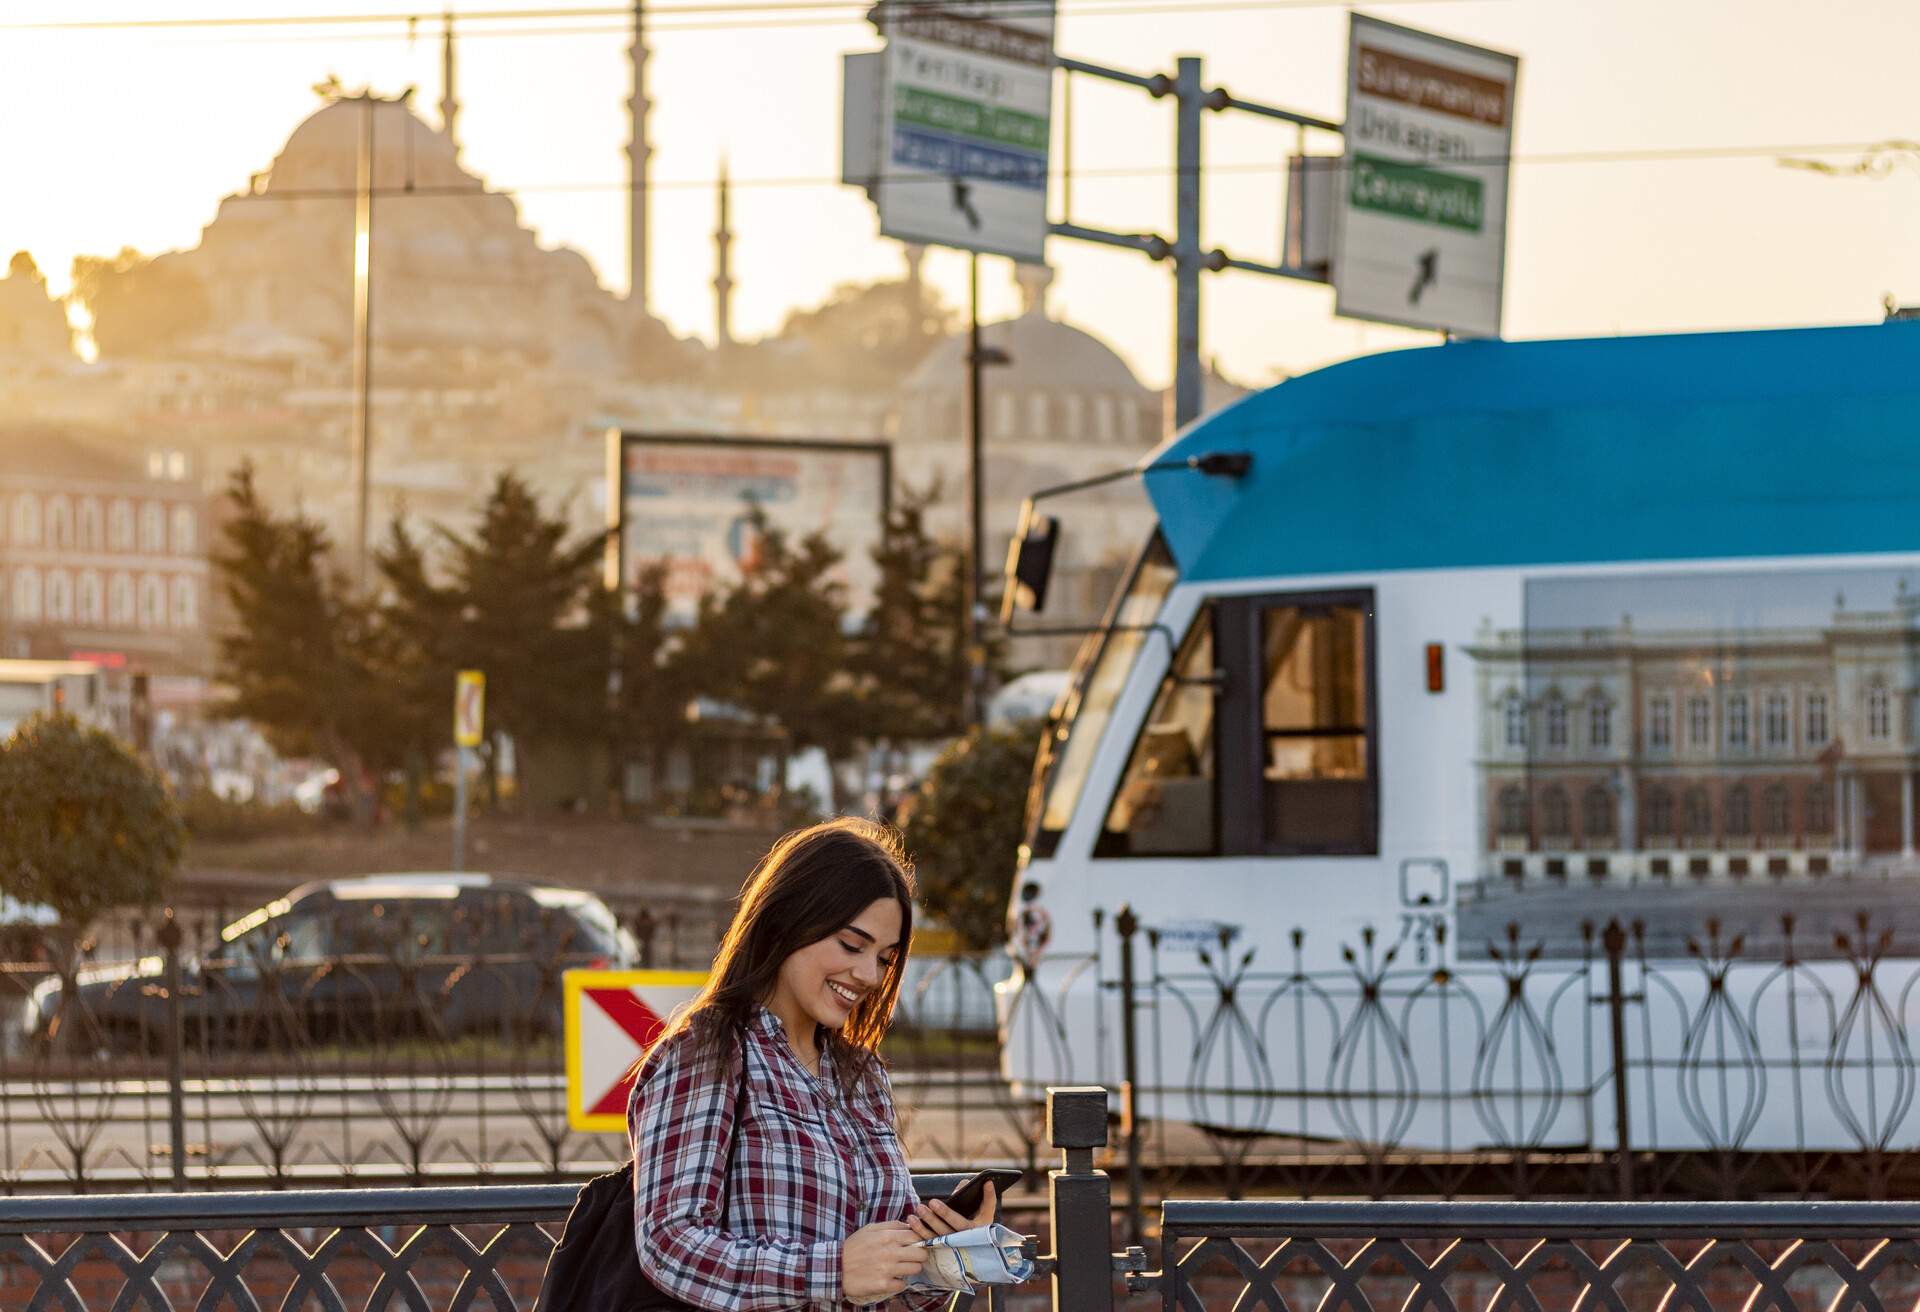 dest_turkey_instanbul_woman_train_gettyimages-1187998704_universal_within-usage-period_84117.jpg